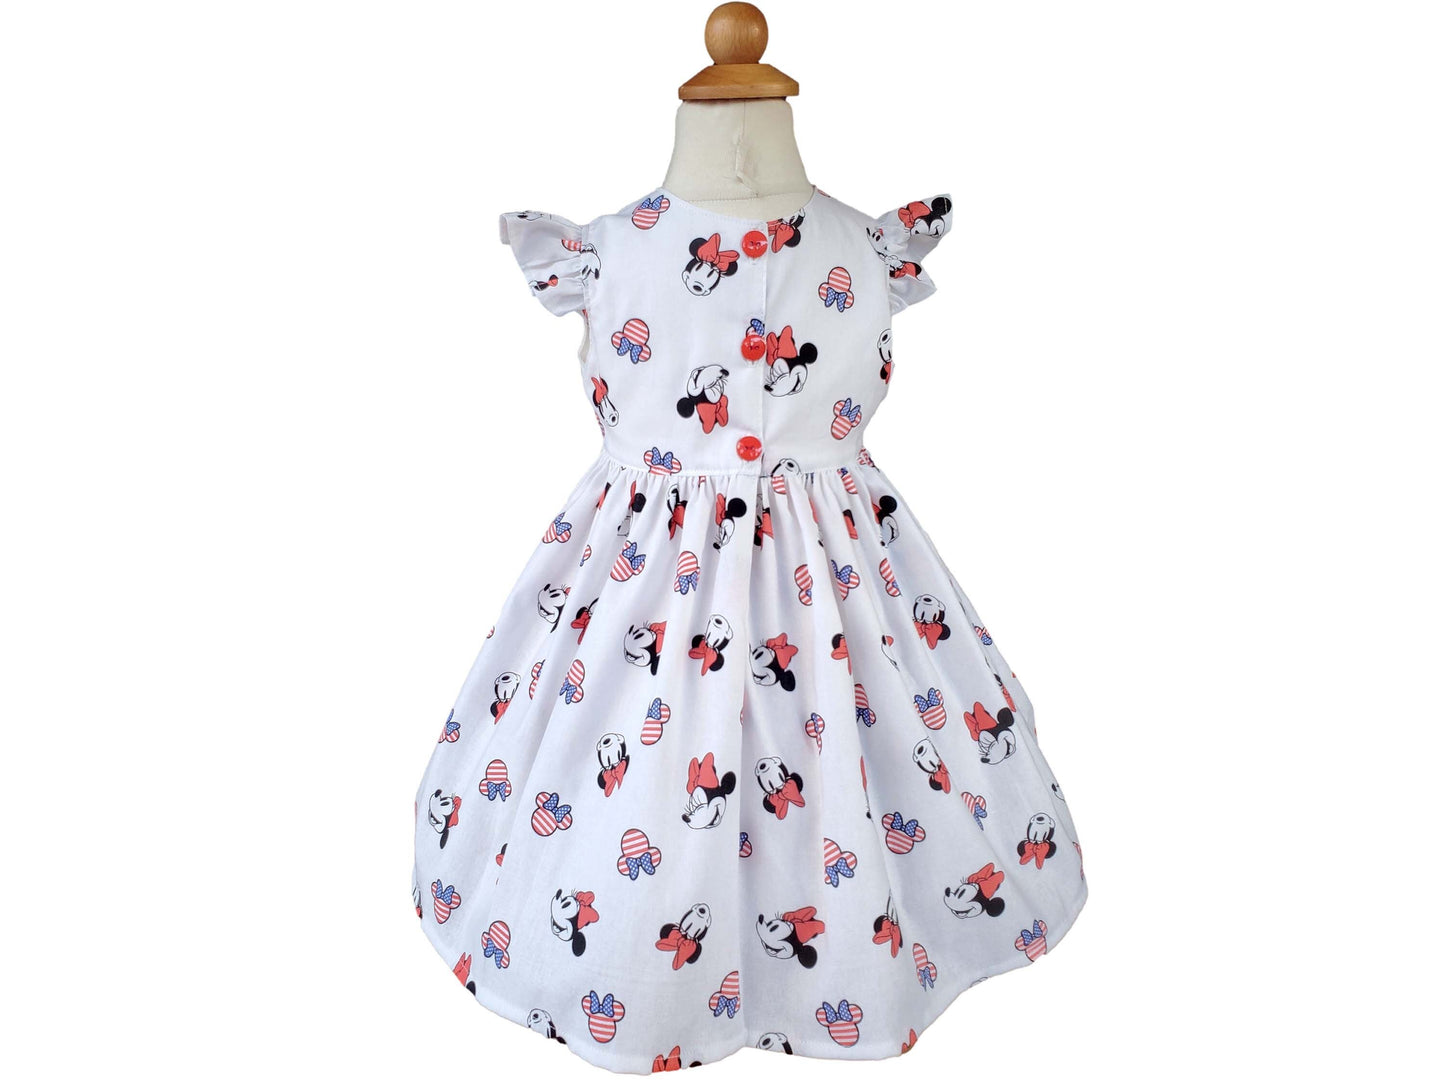 Minnie Mouse Dress back view 